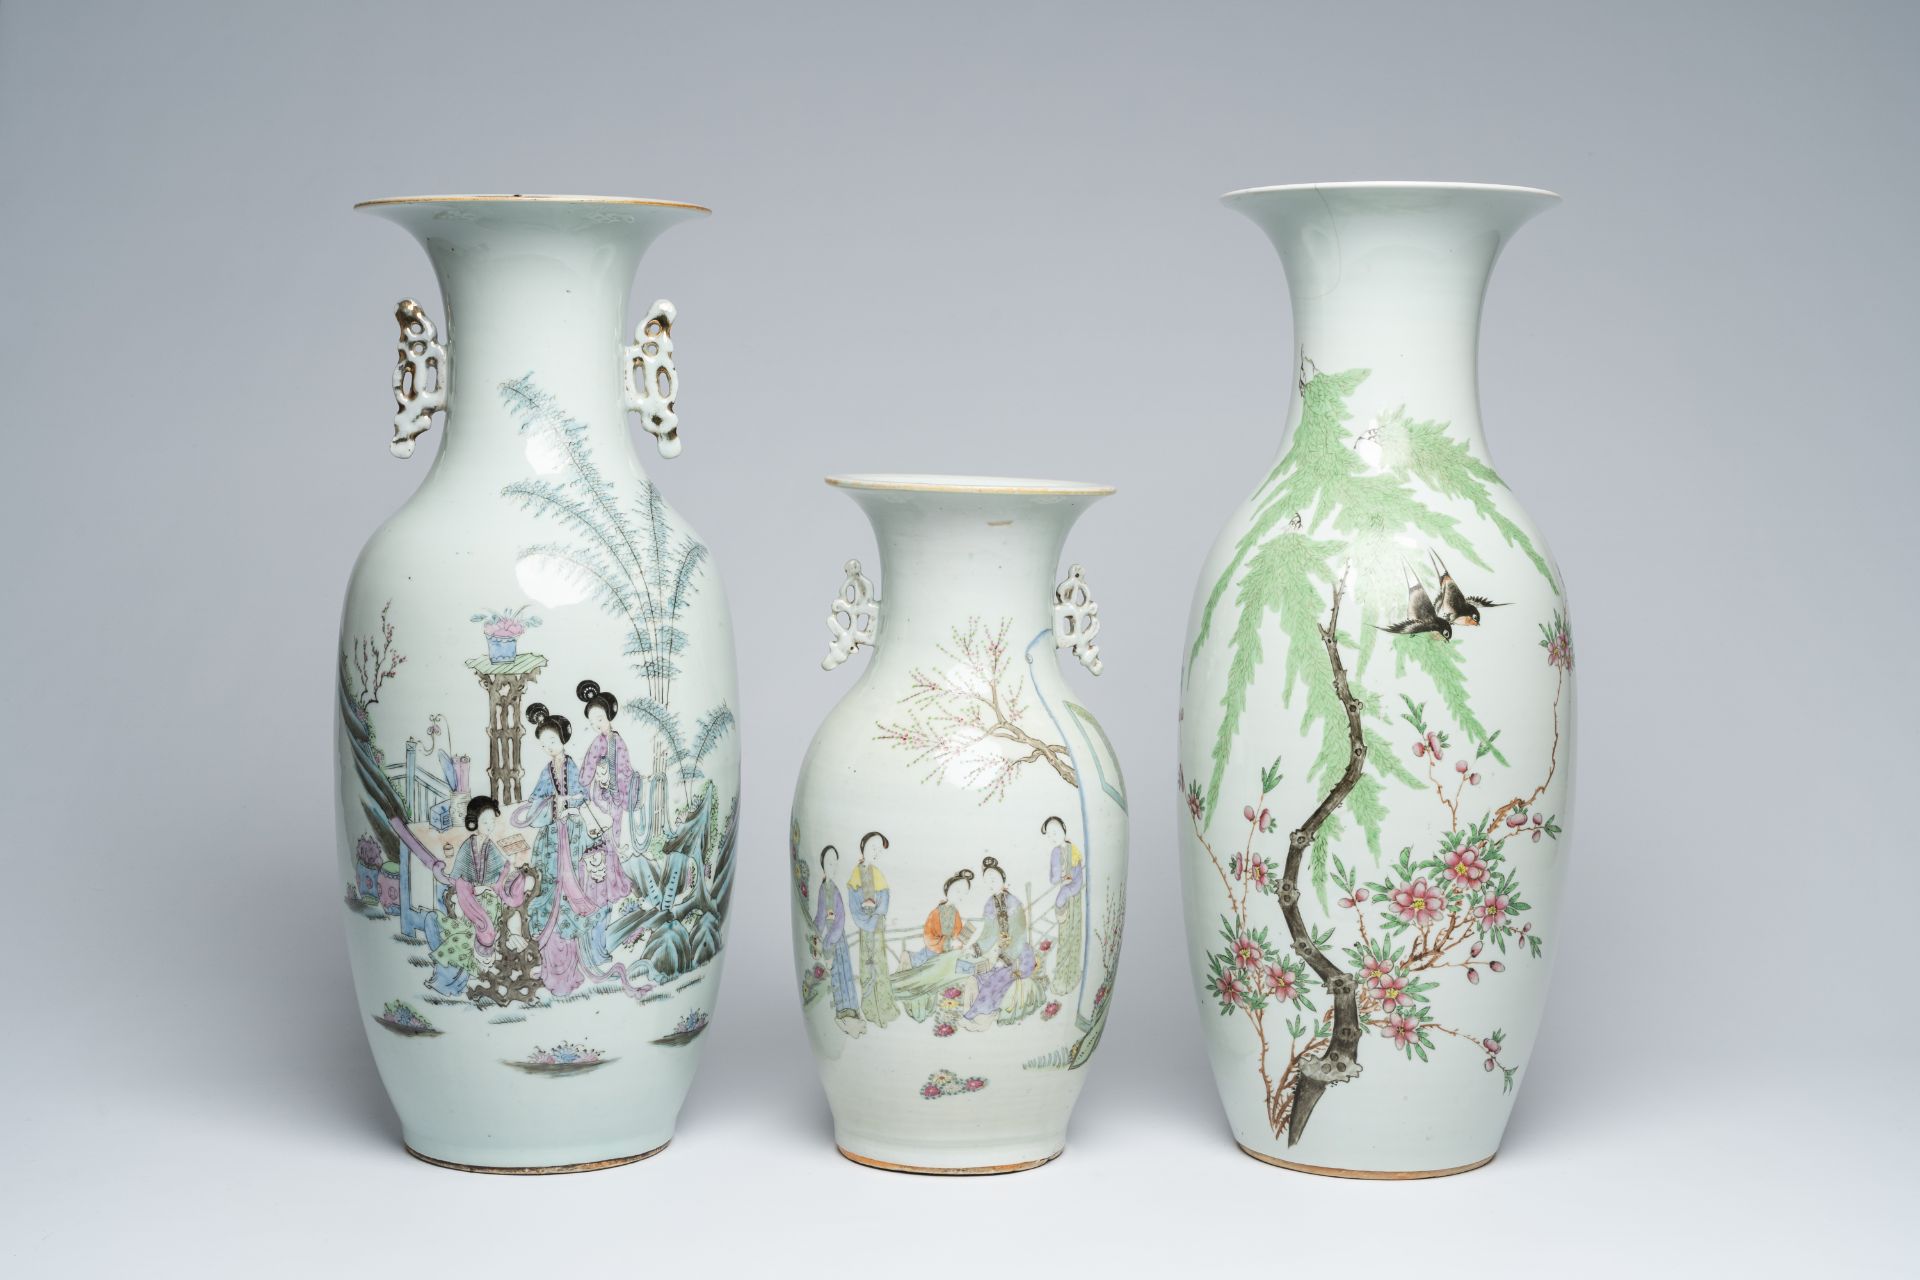 Three Chinese qianjiang cai vases with ladies in a garden and birds among blossoming branches, 19th/